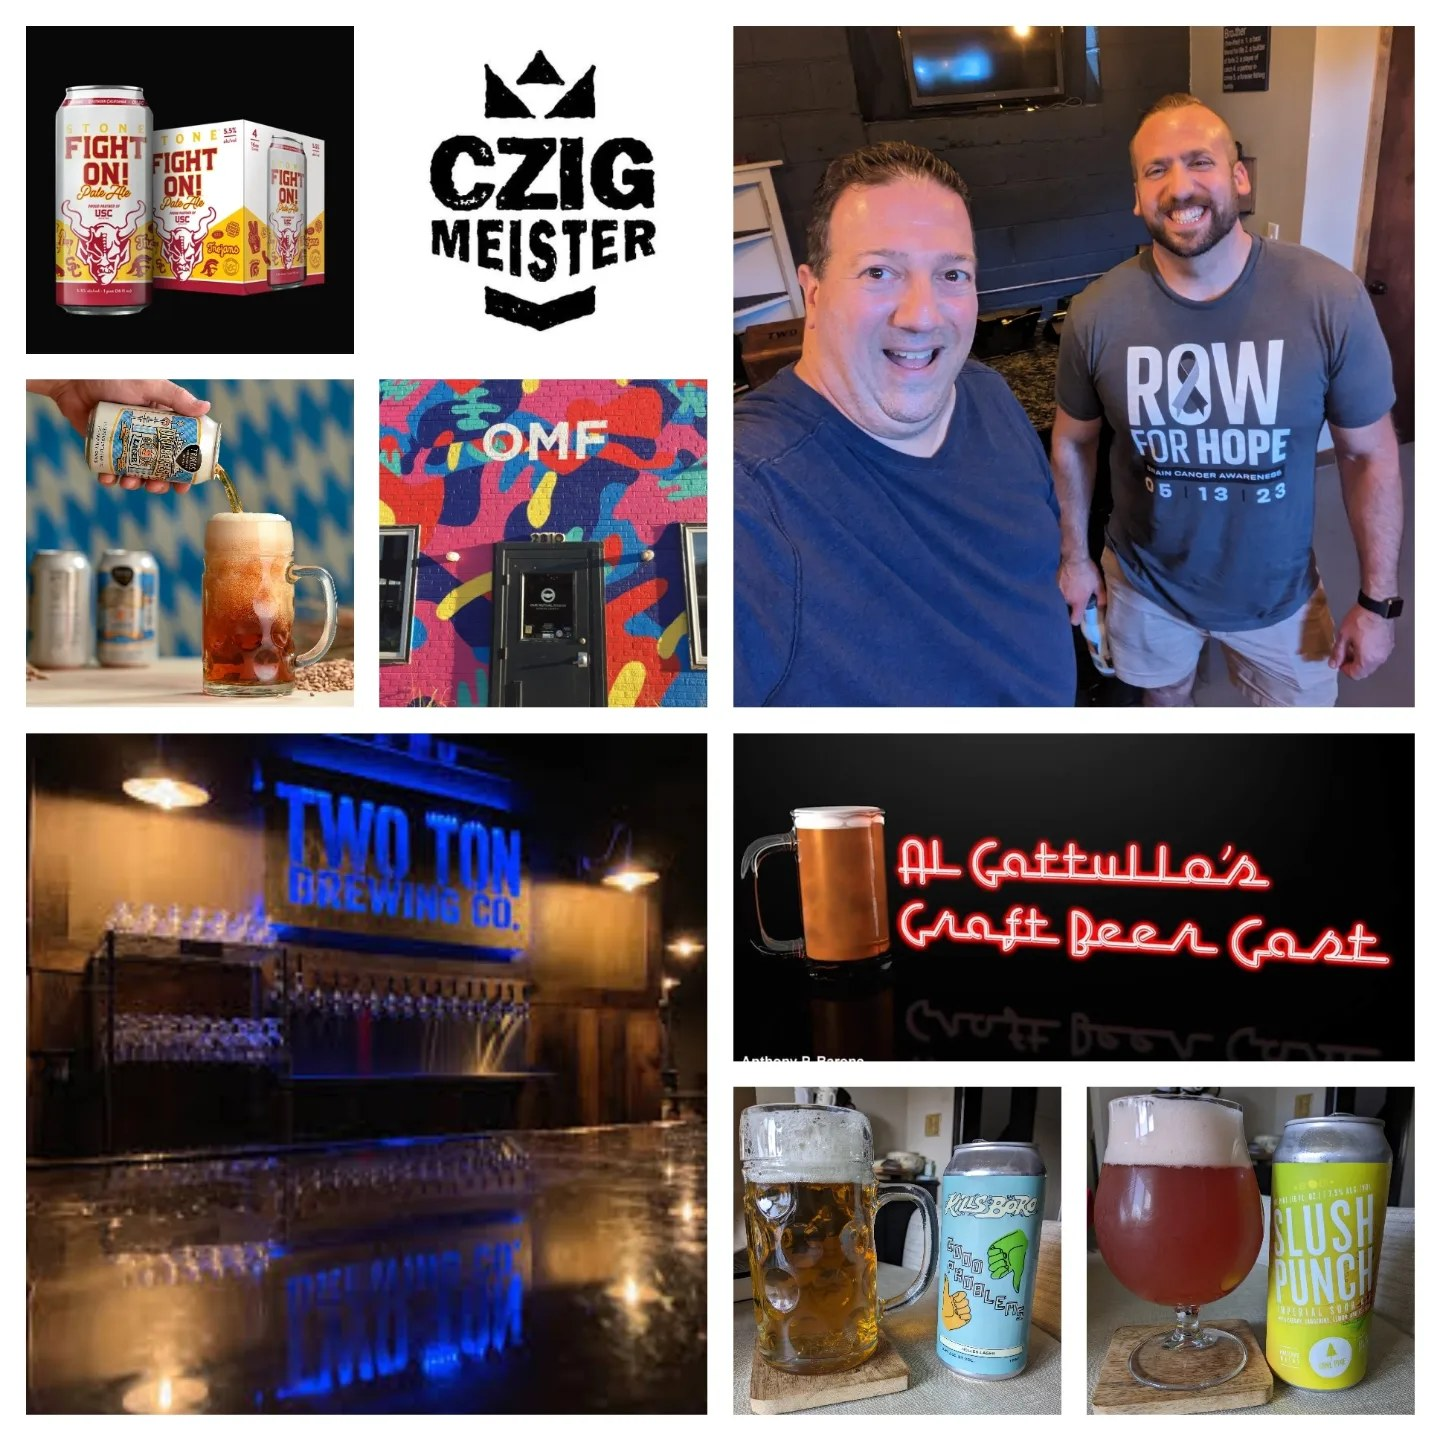 AG Craft Beer Cast 8-13-23 Two Ton Brewing